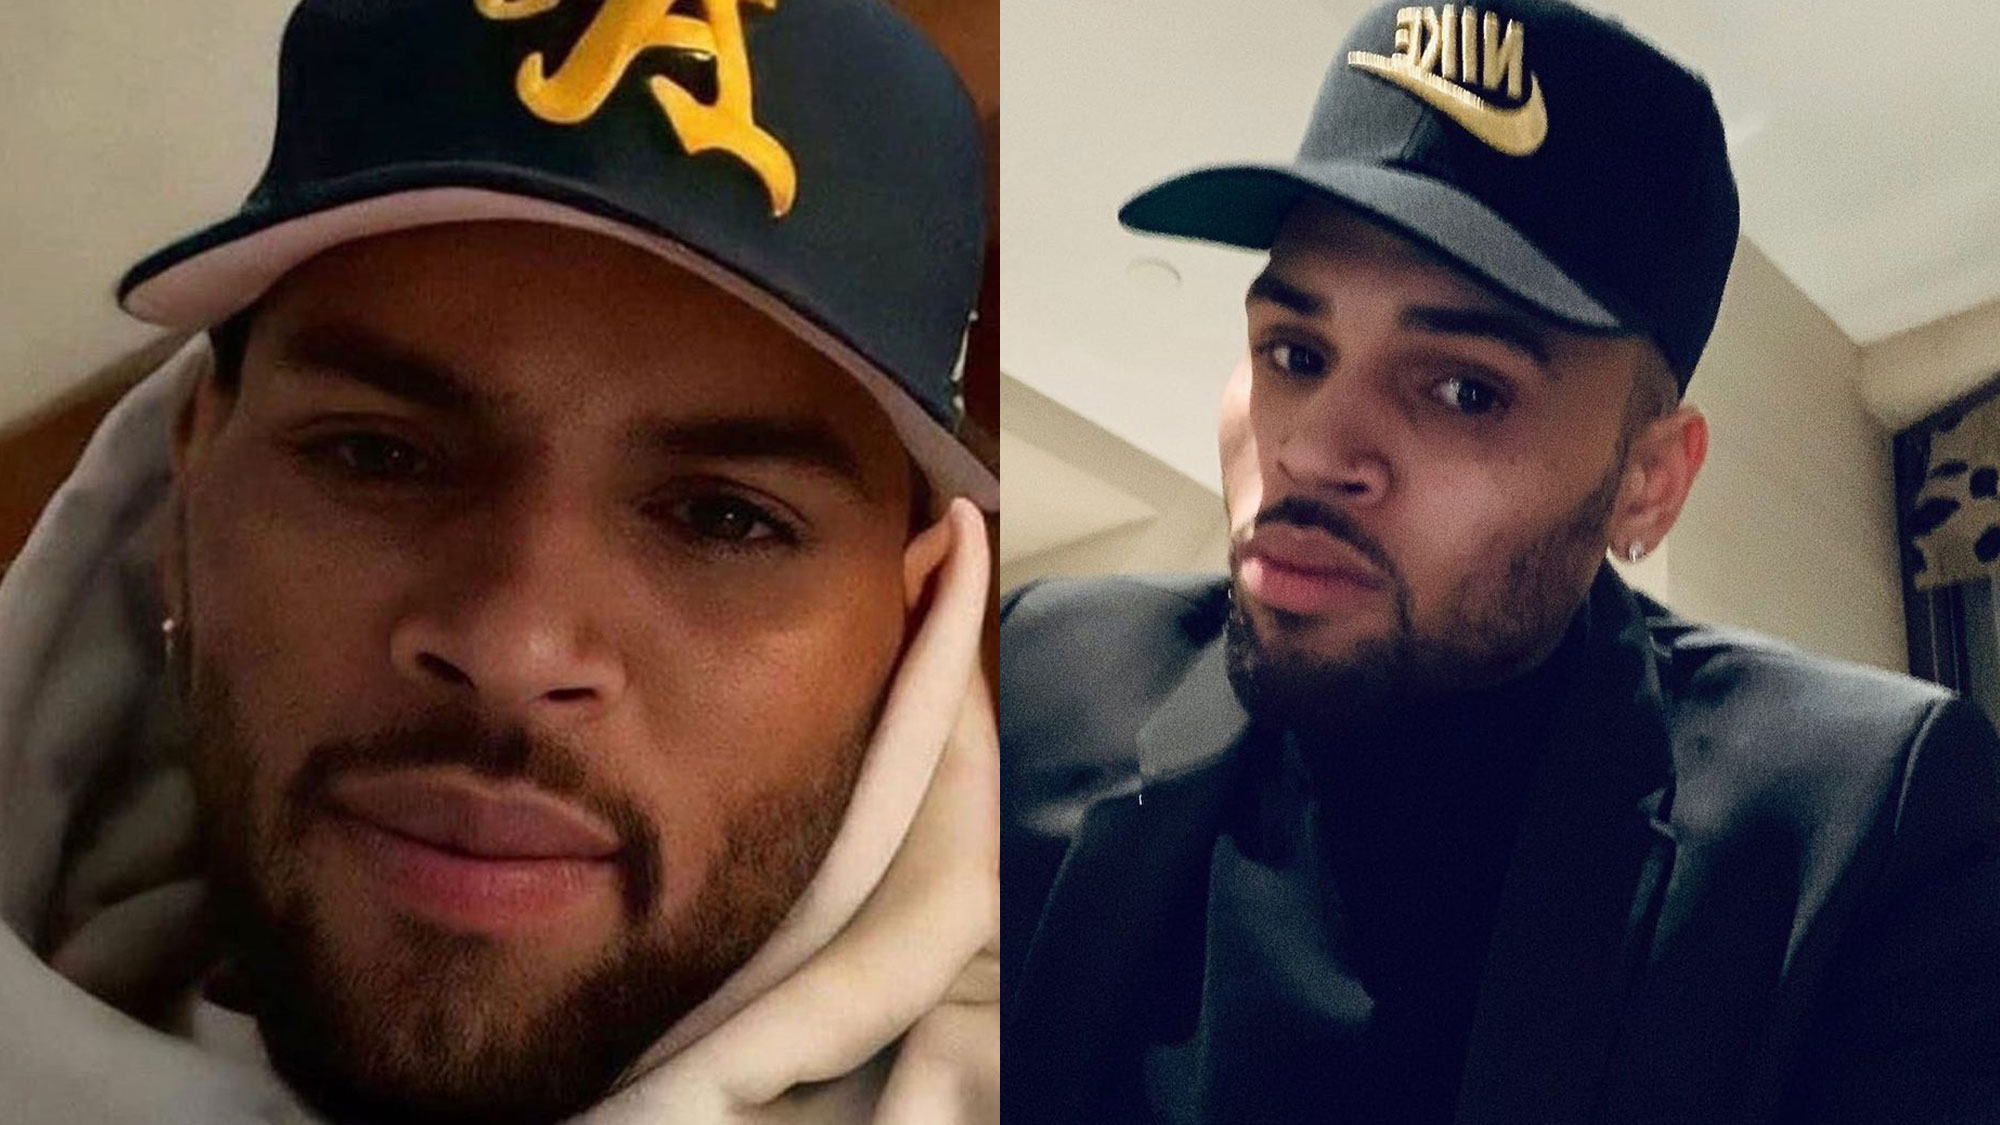 christoffer johnson recommends chris brown dick pic pic